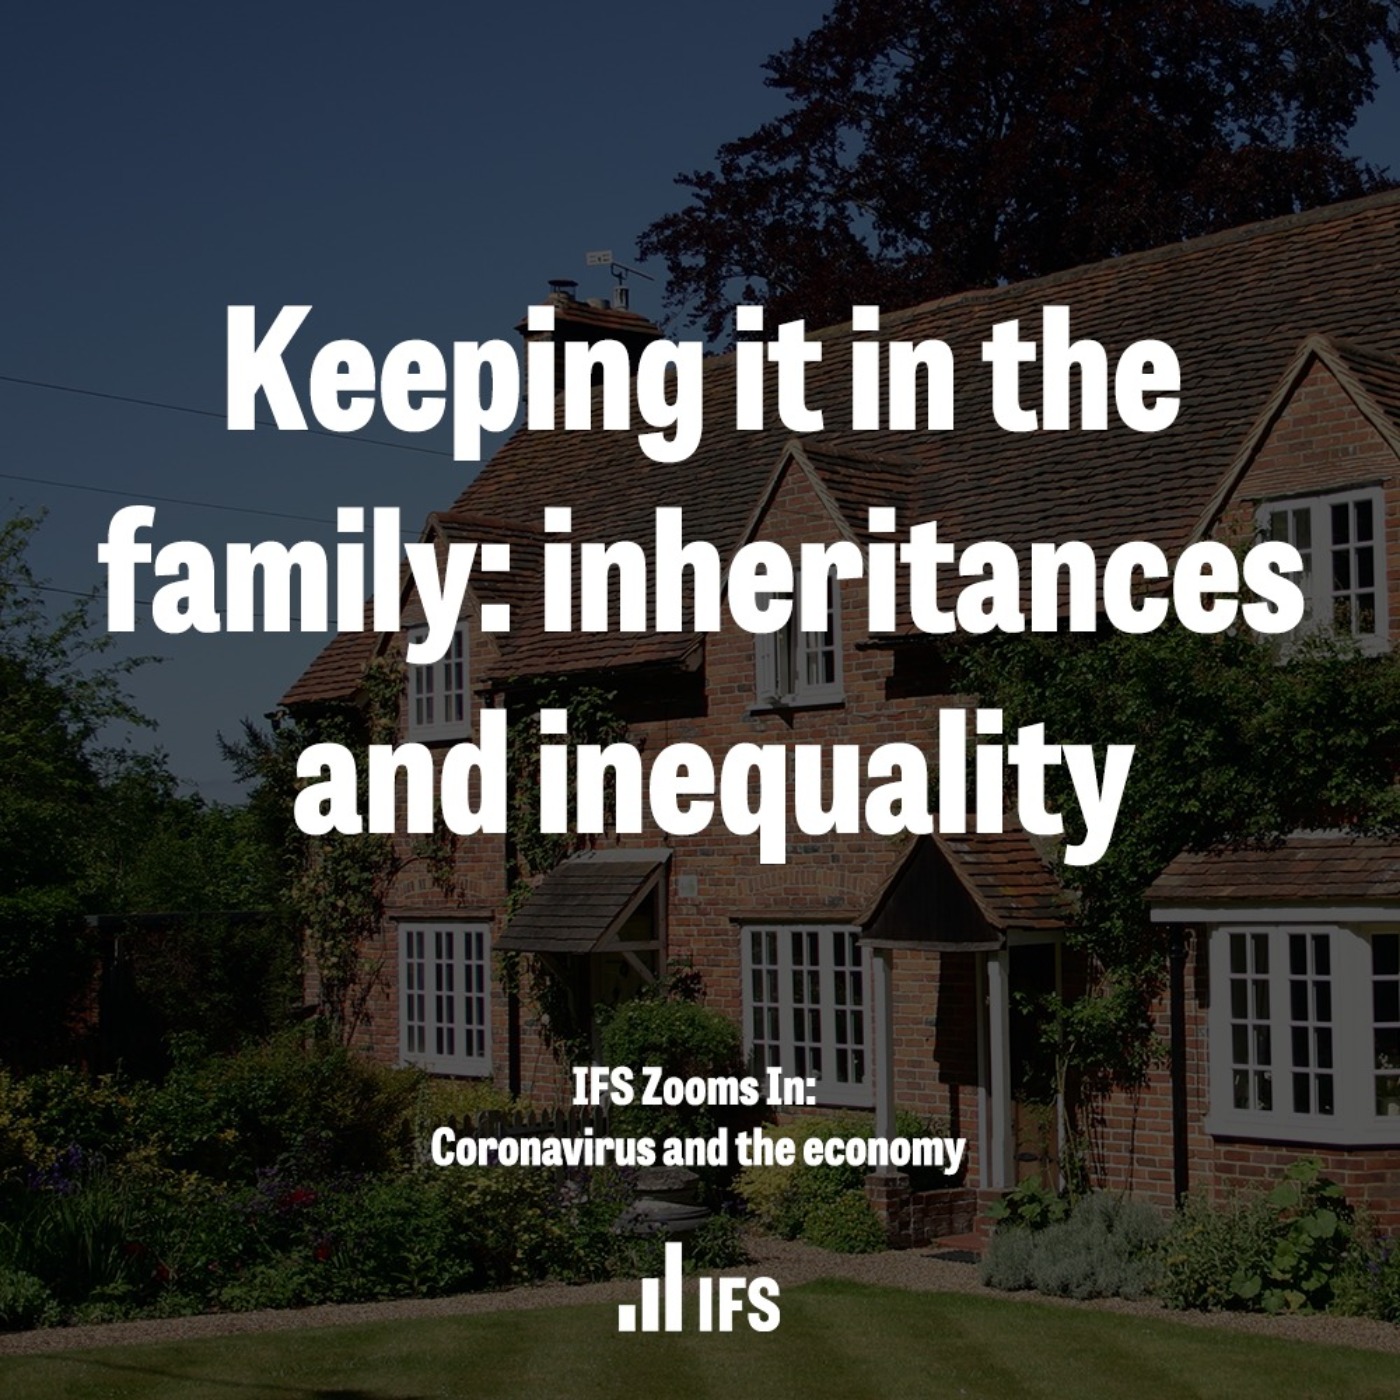 Keeping it in the family: inheritances and inequality